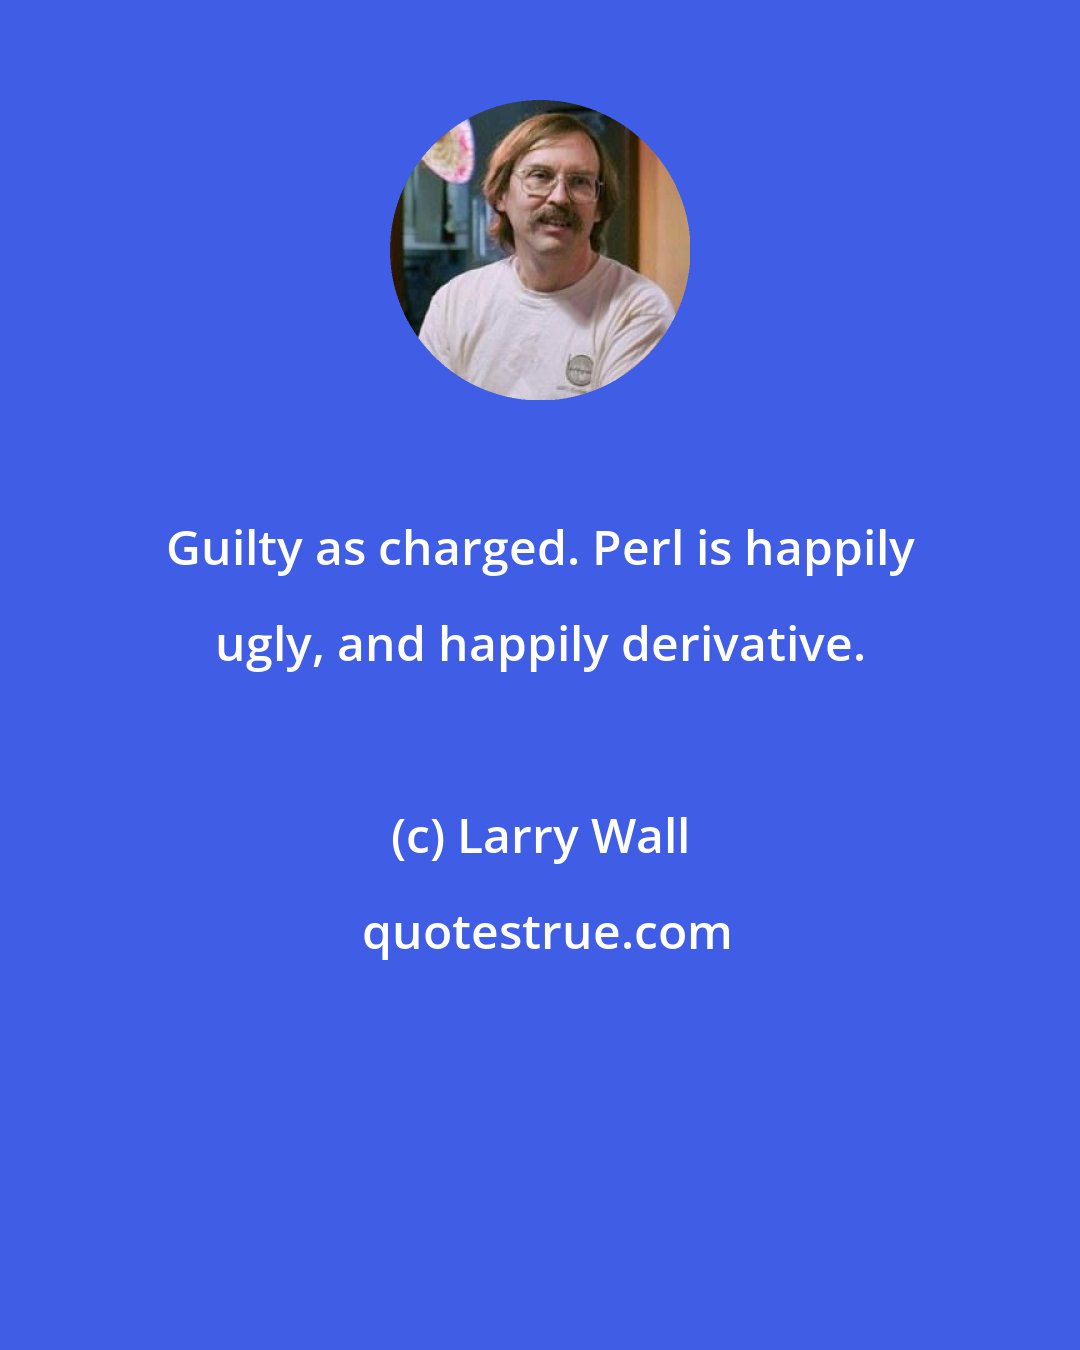 Larry Wall: Guilty as charged. Perl is happily ugly, and happily derivative.